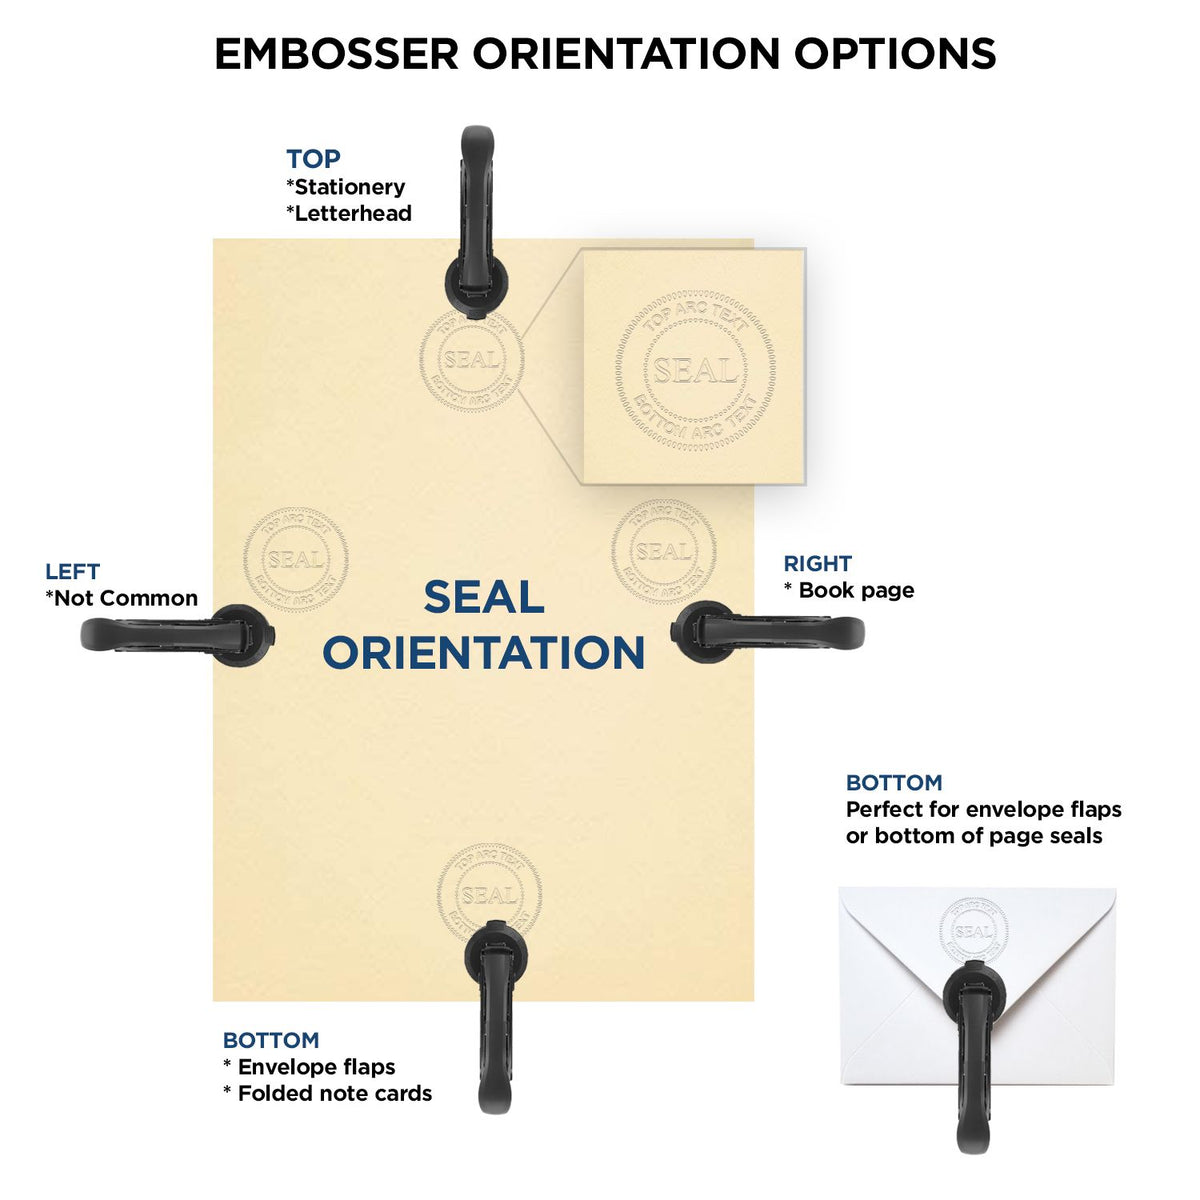 An infographic for the Handheld Nebraska Architect Seal Embosser showing embosser orientation, this is showing examples of a top, bottom, right and left insert.